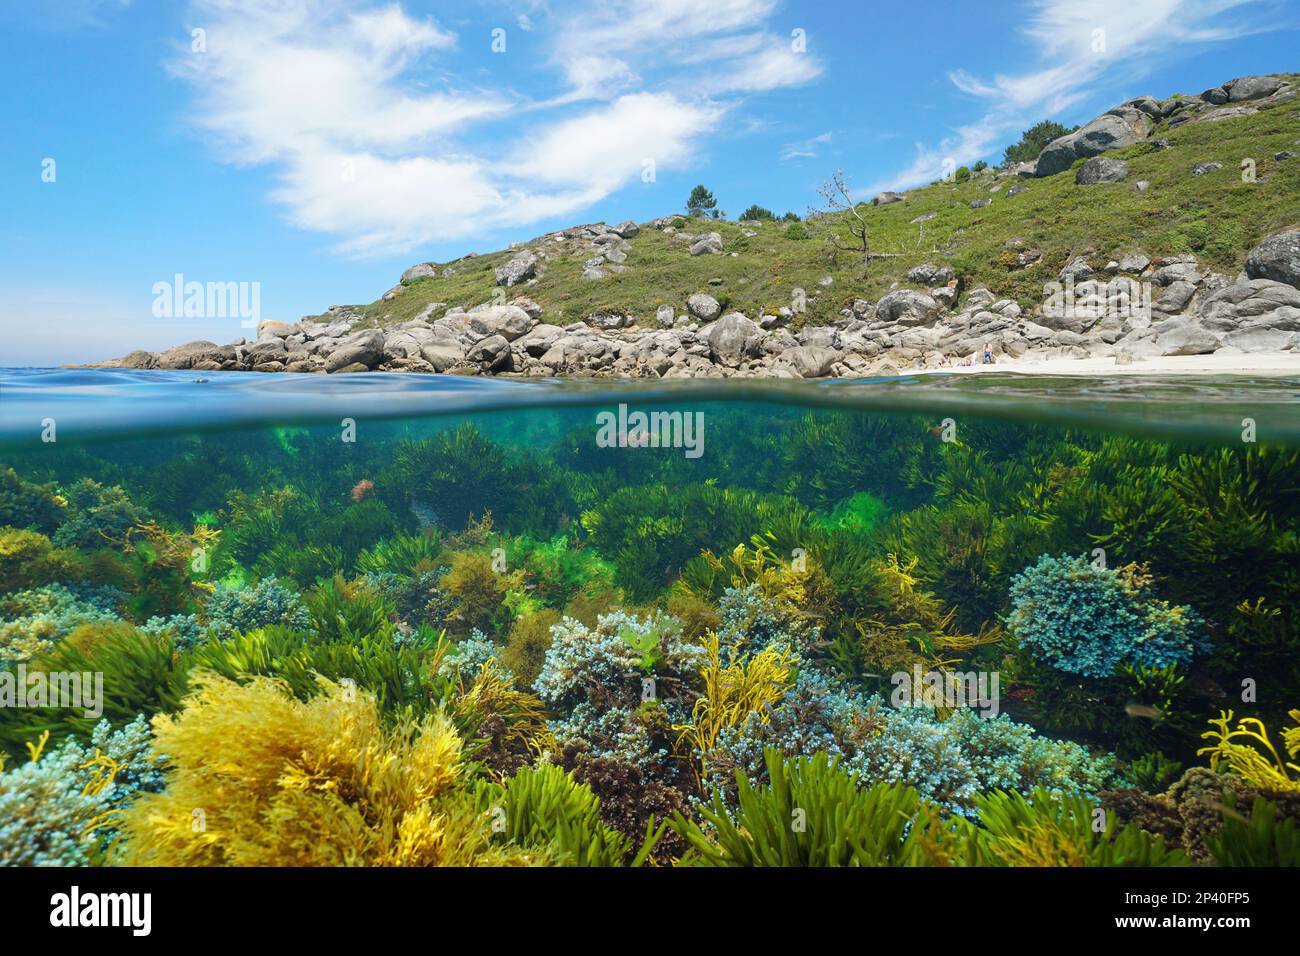 Spain, Galicia, wild Atlantic coast with algae in the ocean, split level view over and under water surface, Pontevedra province, Rias Baixas Stock Photo